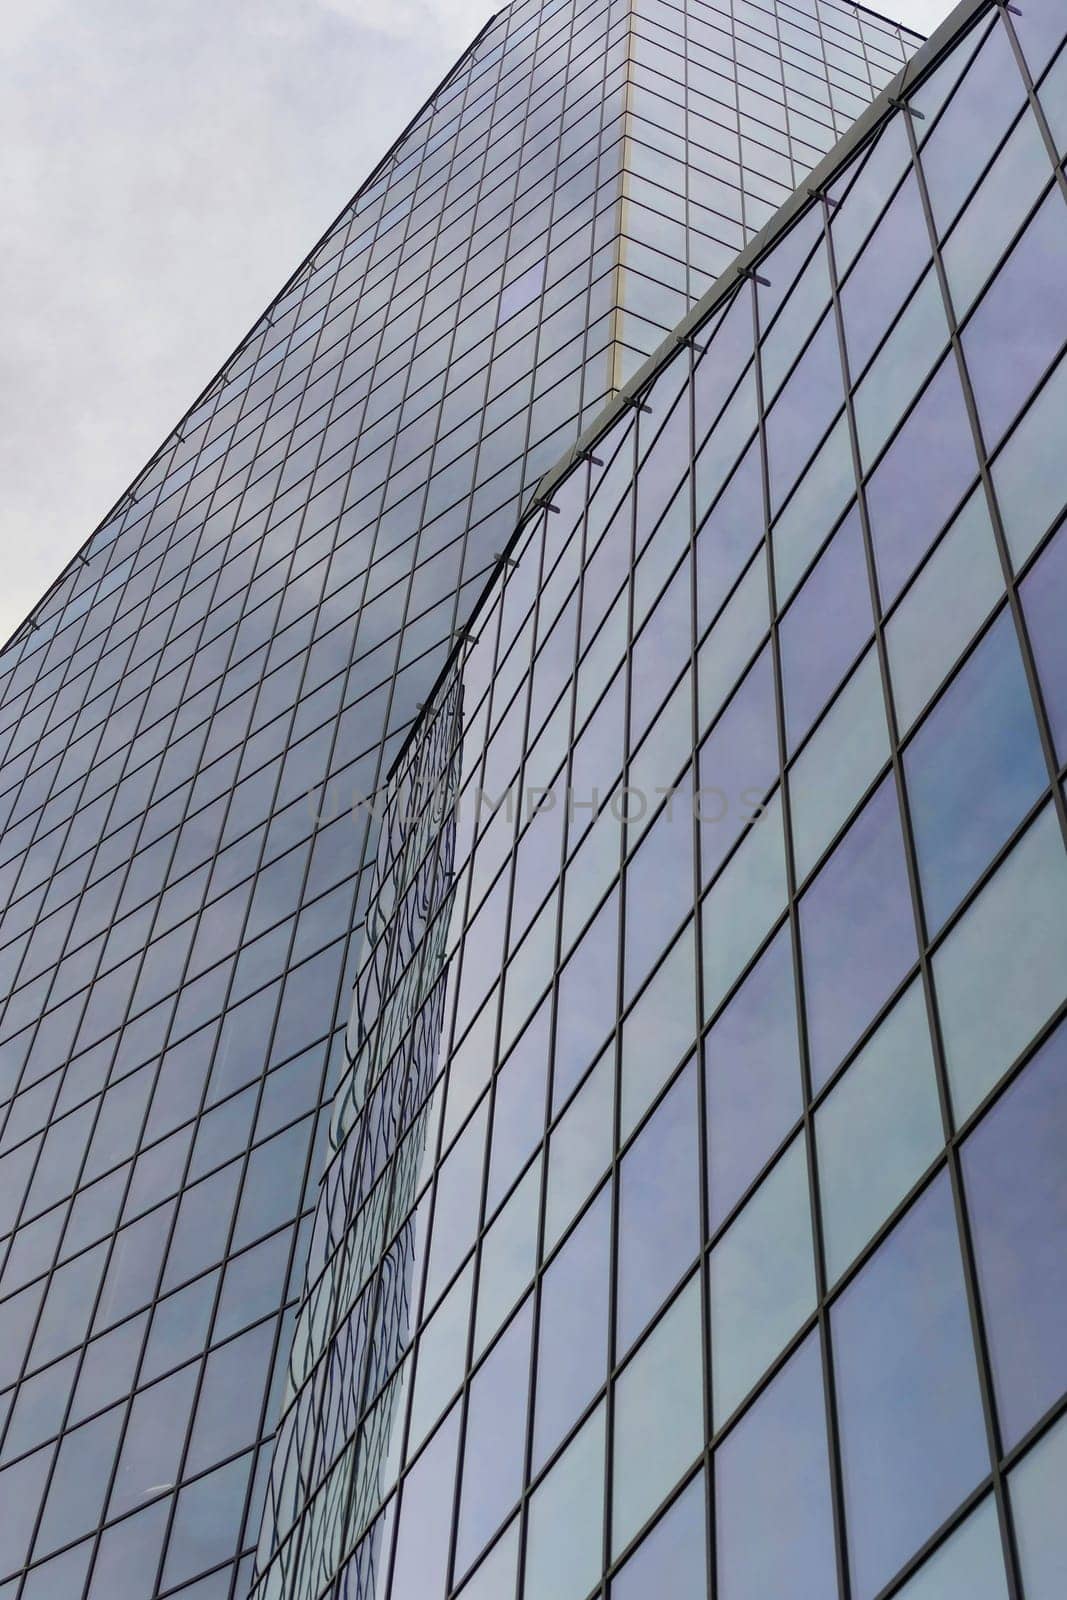 glass facade of skyscraper in perspective for vertical urban background by Annado